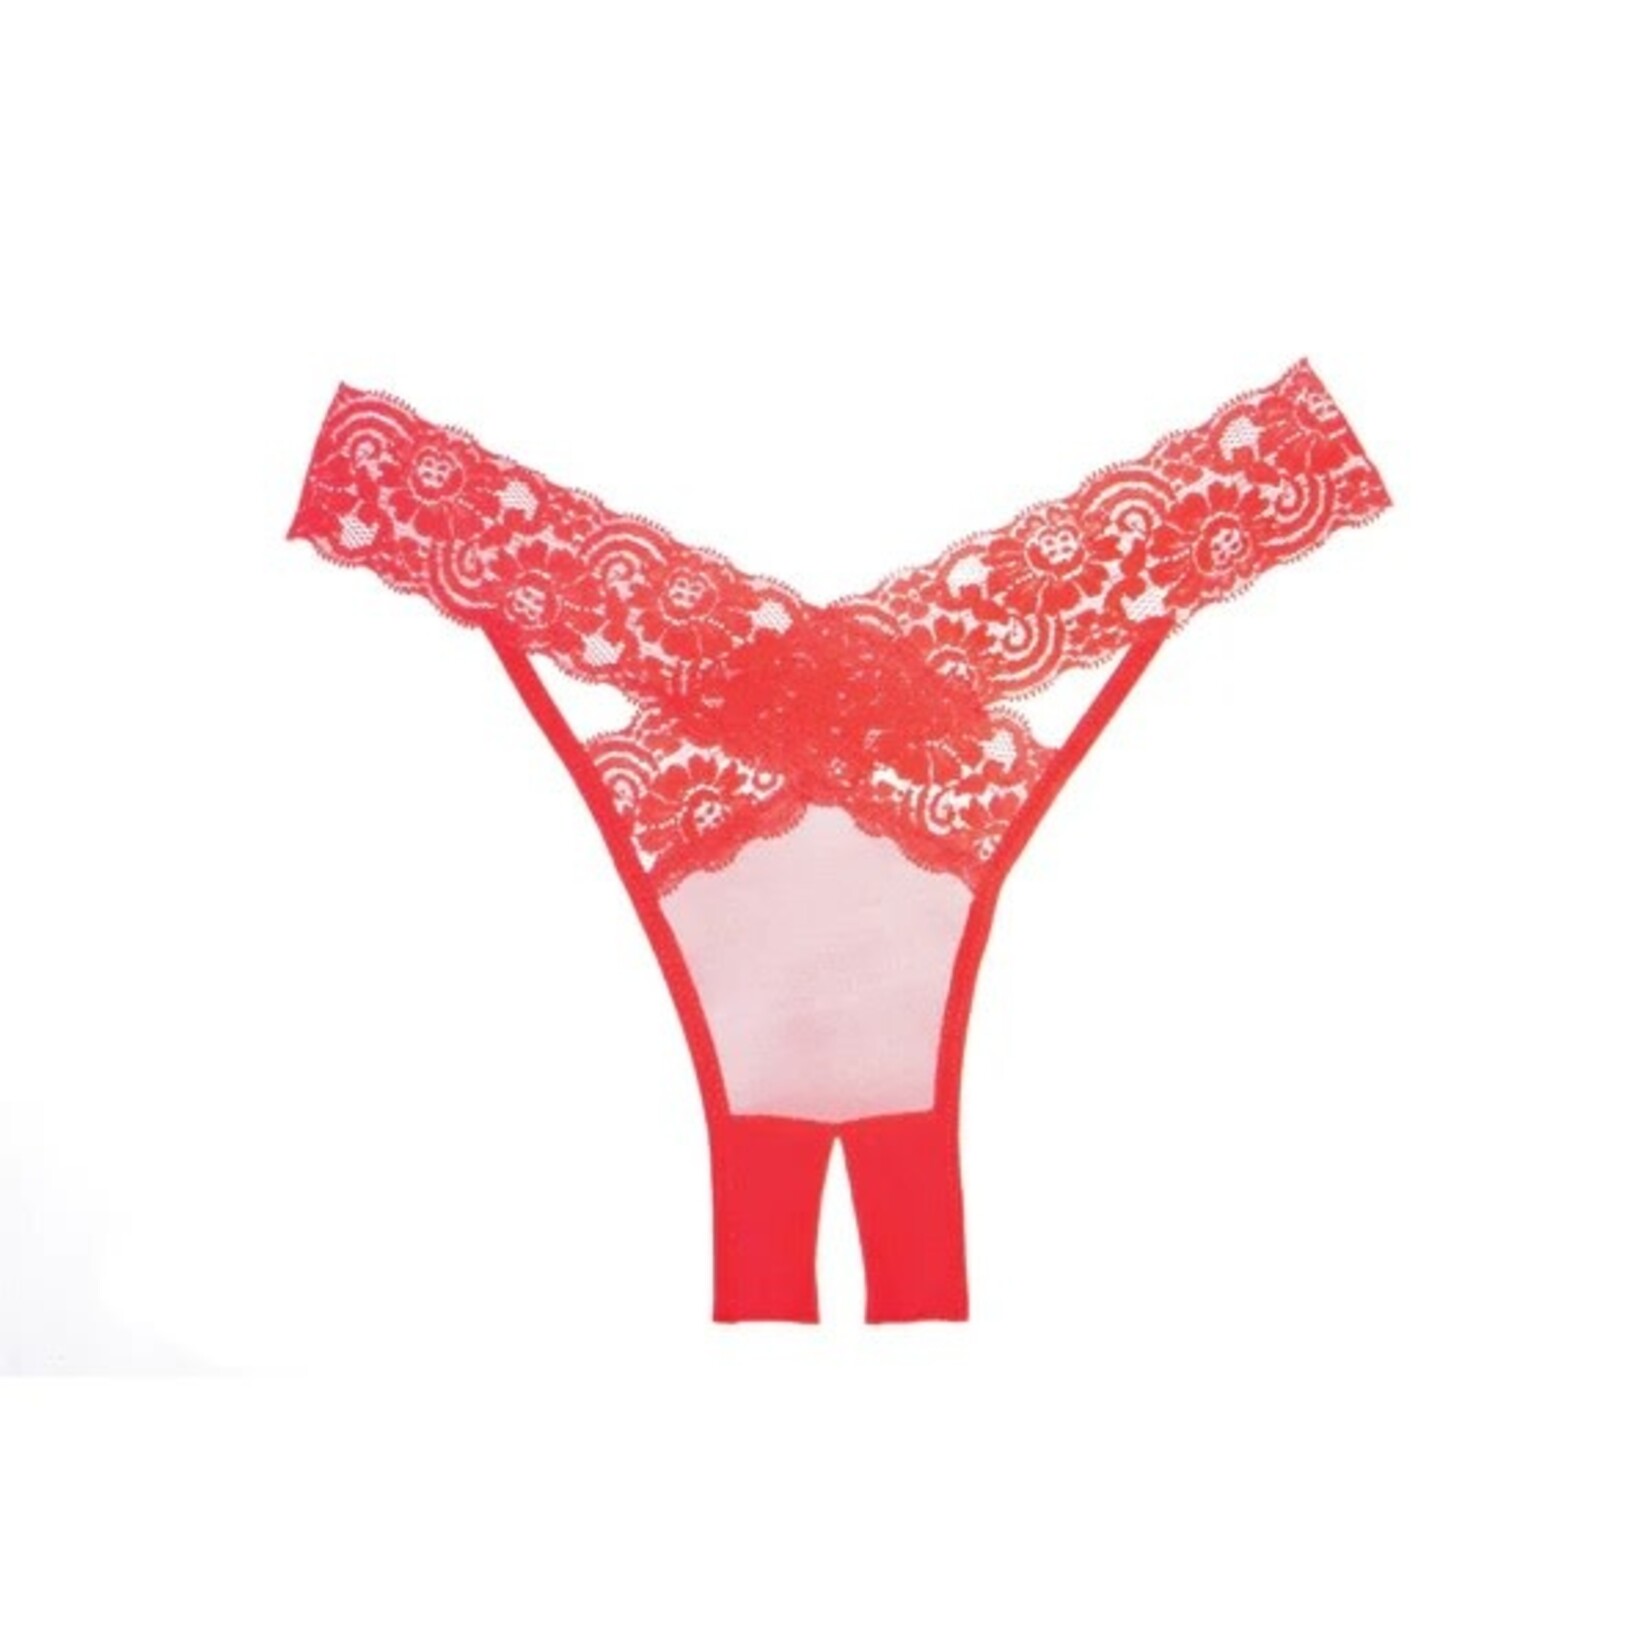 ALLURE LINGERIE ALLURE ADORE - DESIRE PANTY - ONE SIZE-RED